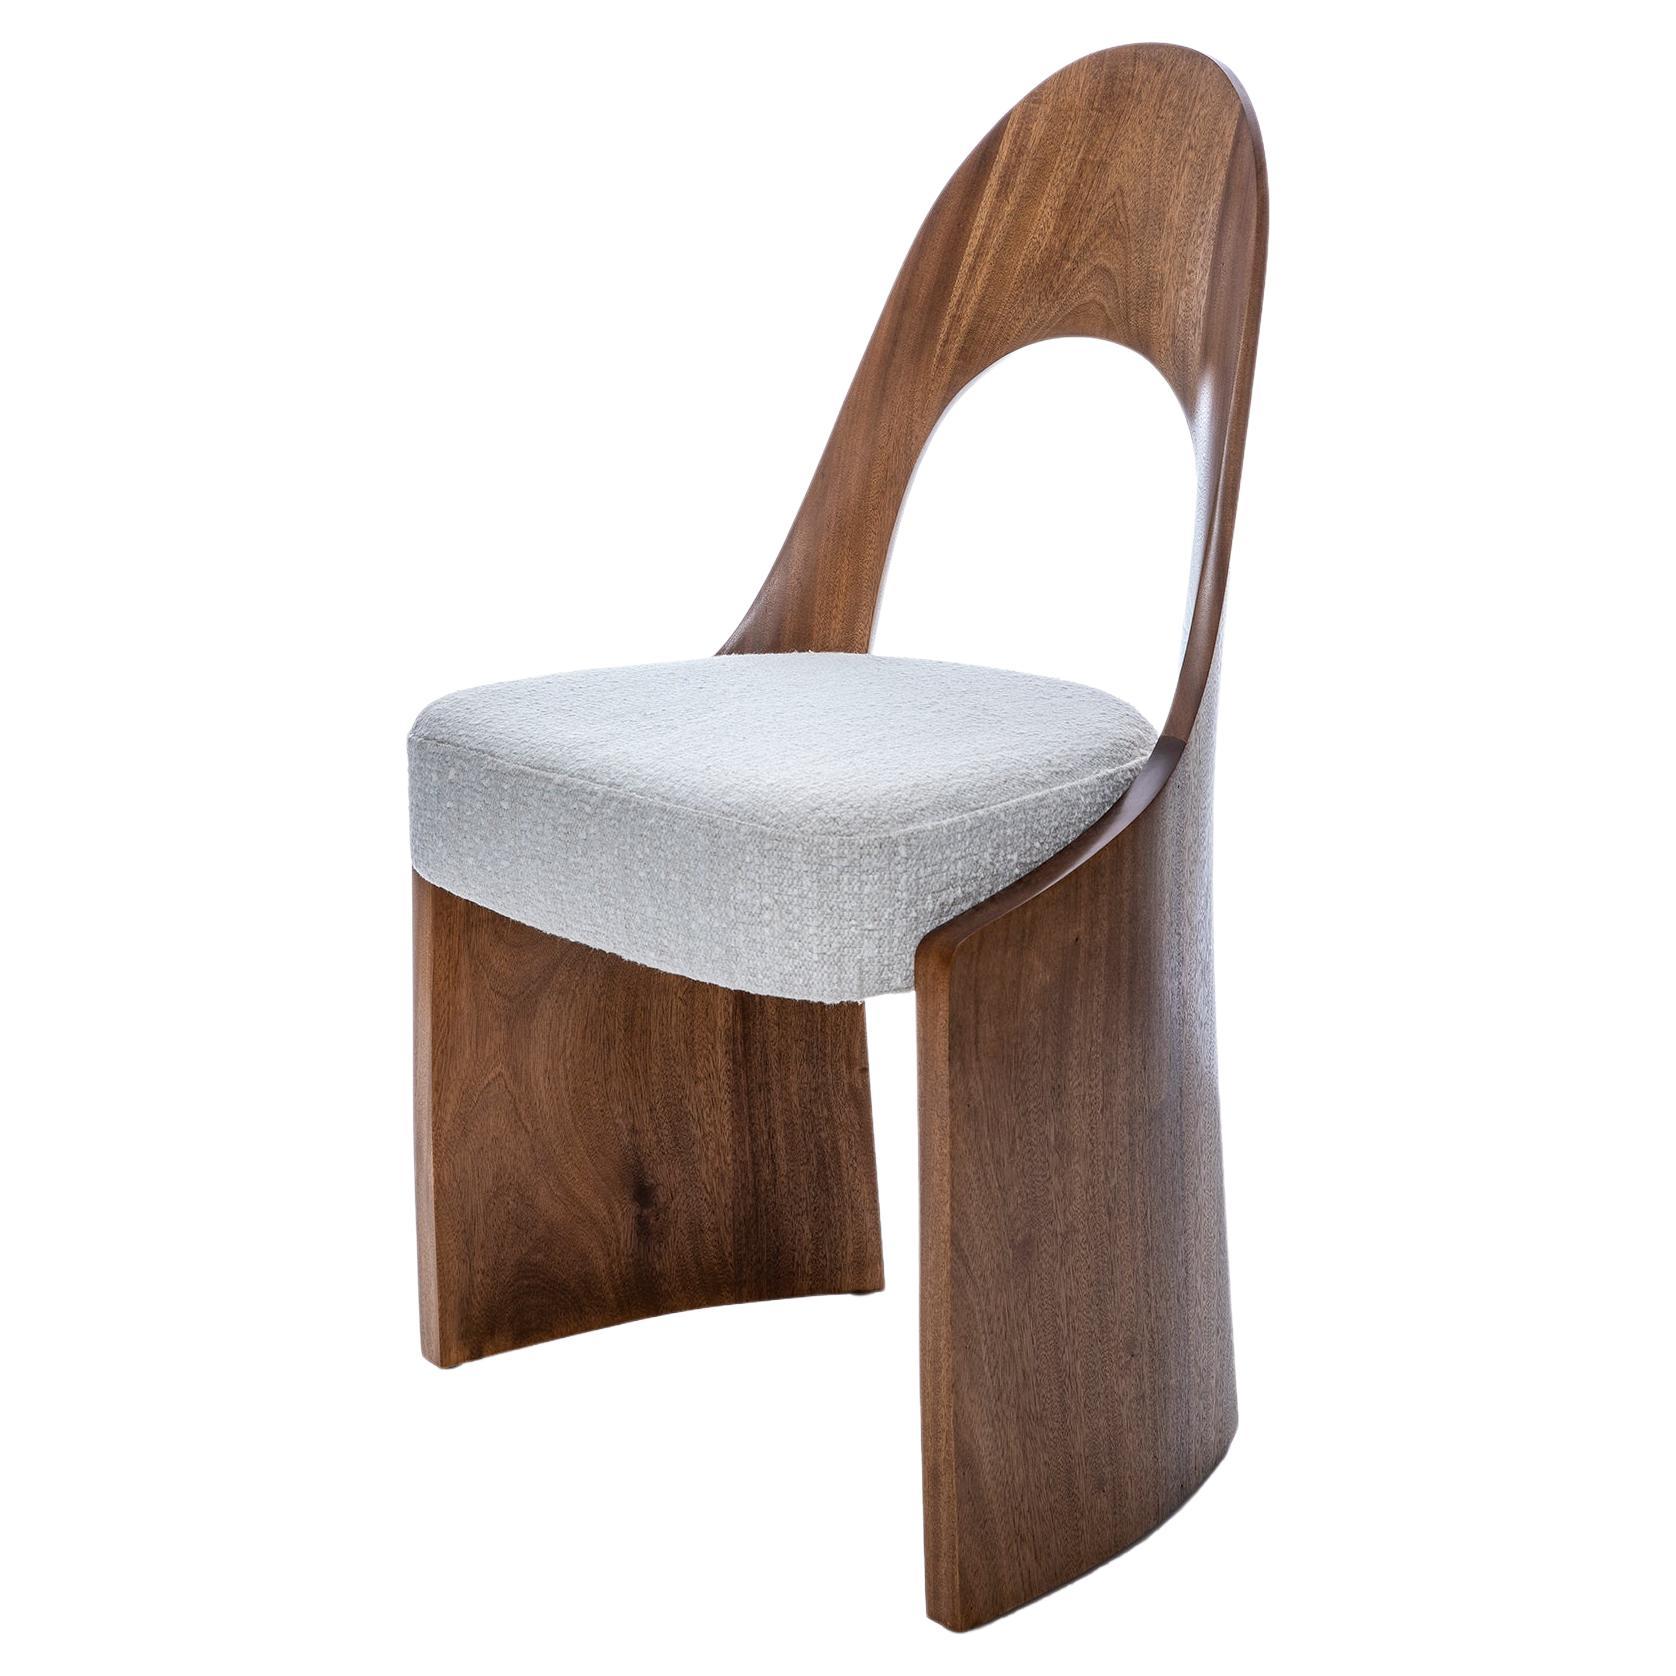 "Gaia" - Carved, Modern, Hand Finished Dining Chair - Wood Tone, COM For Sale